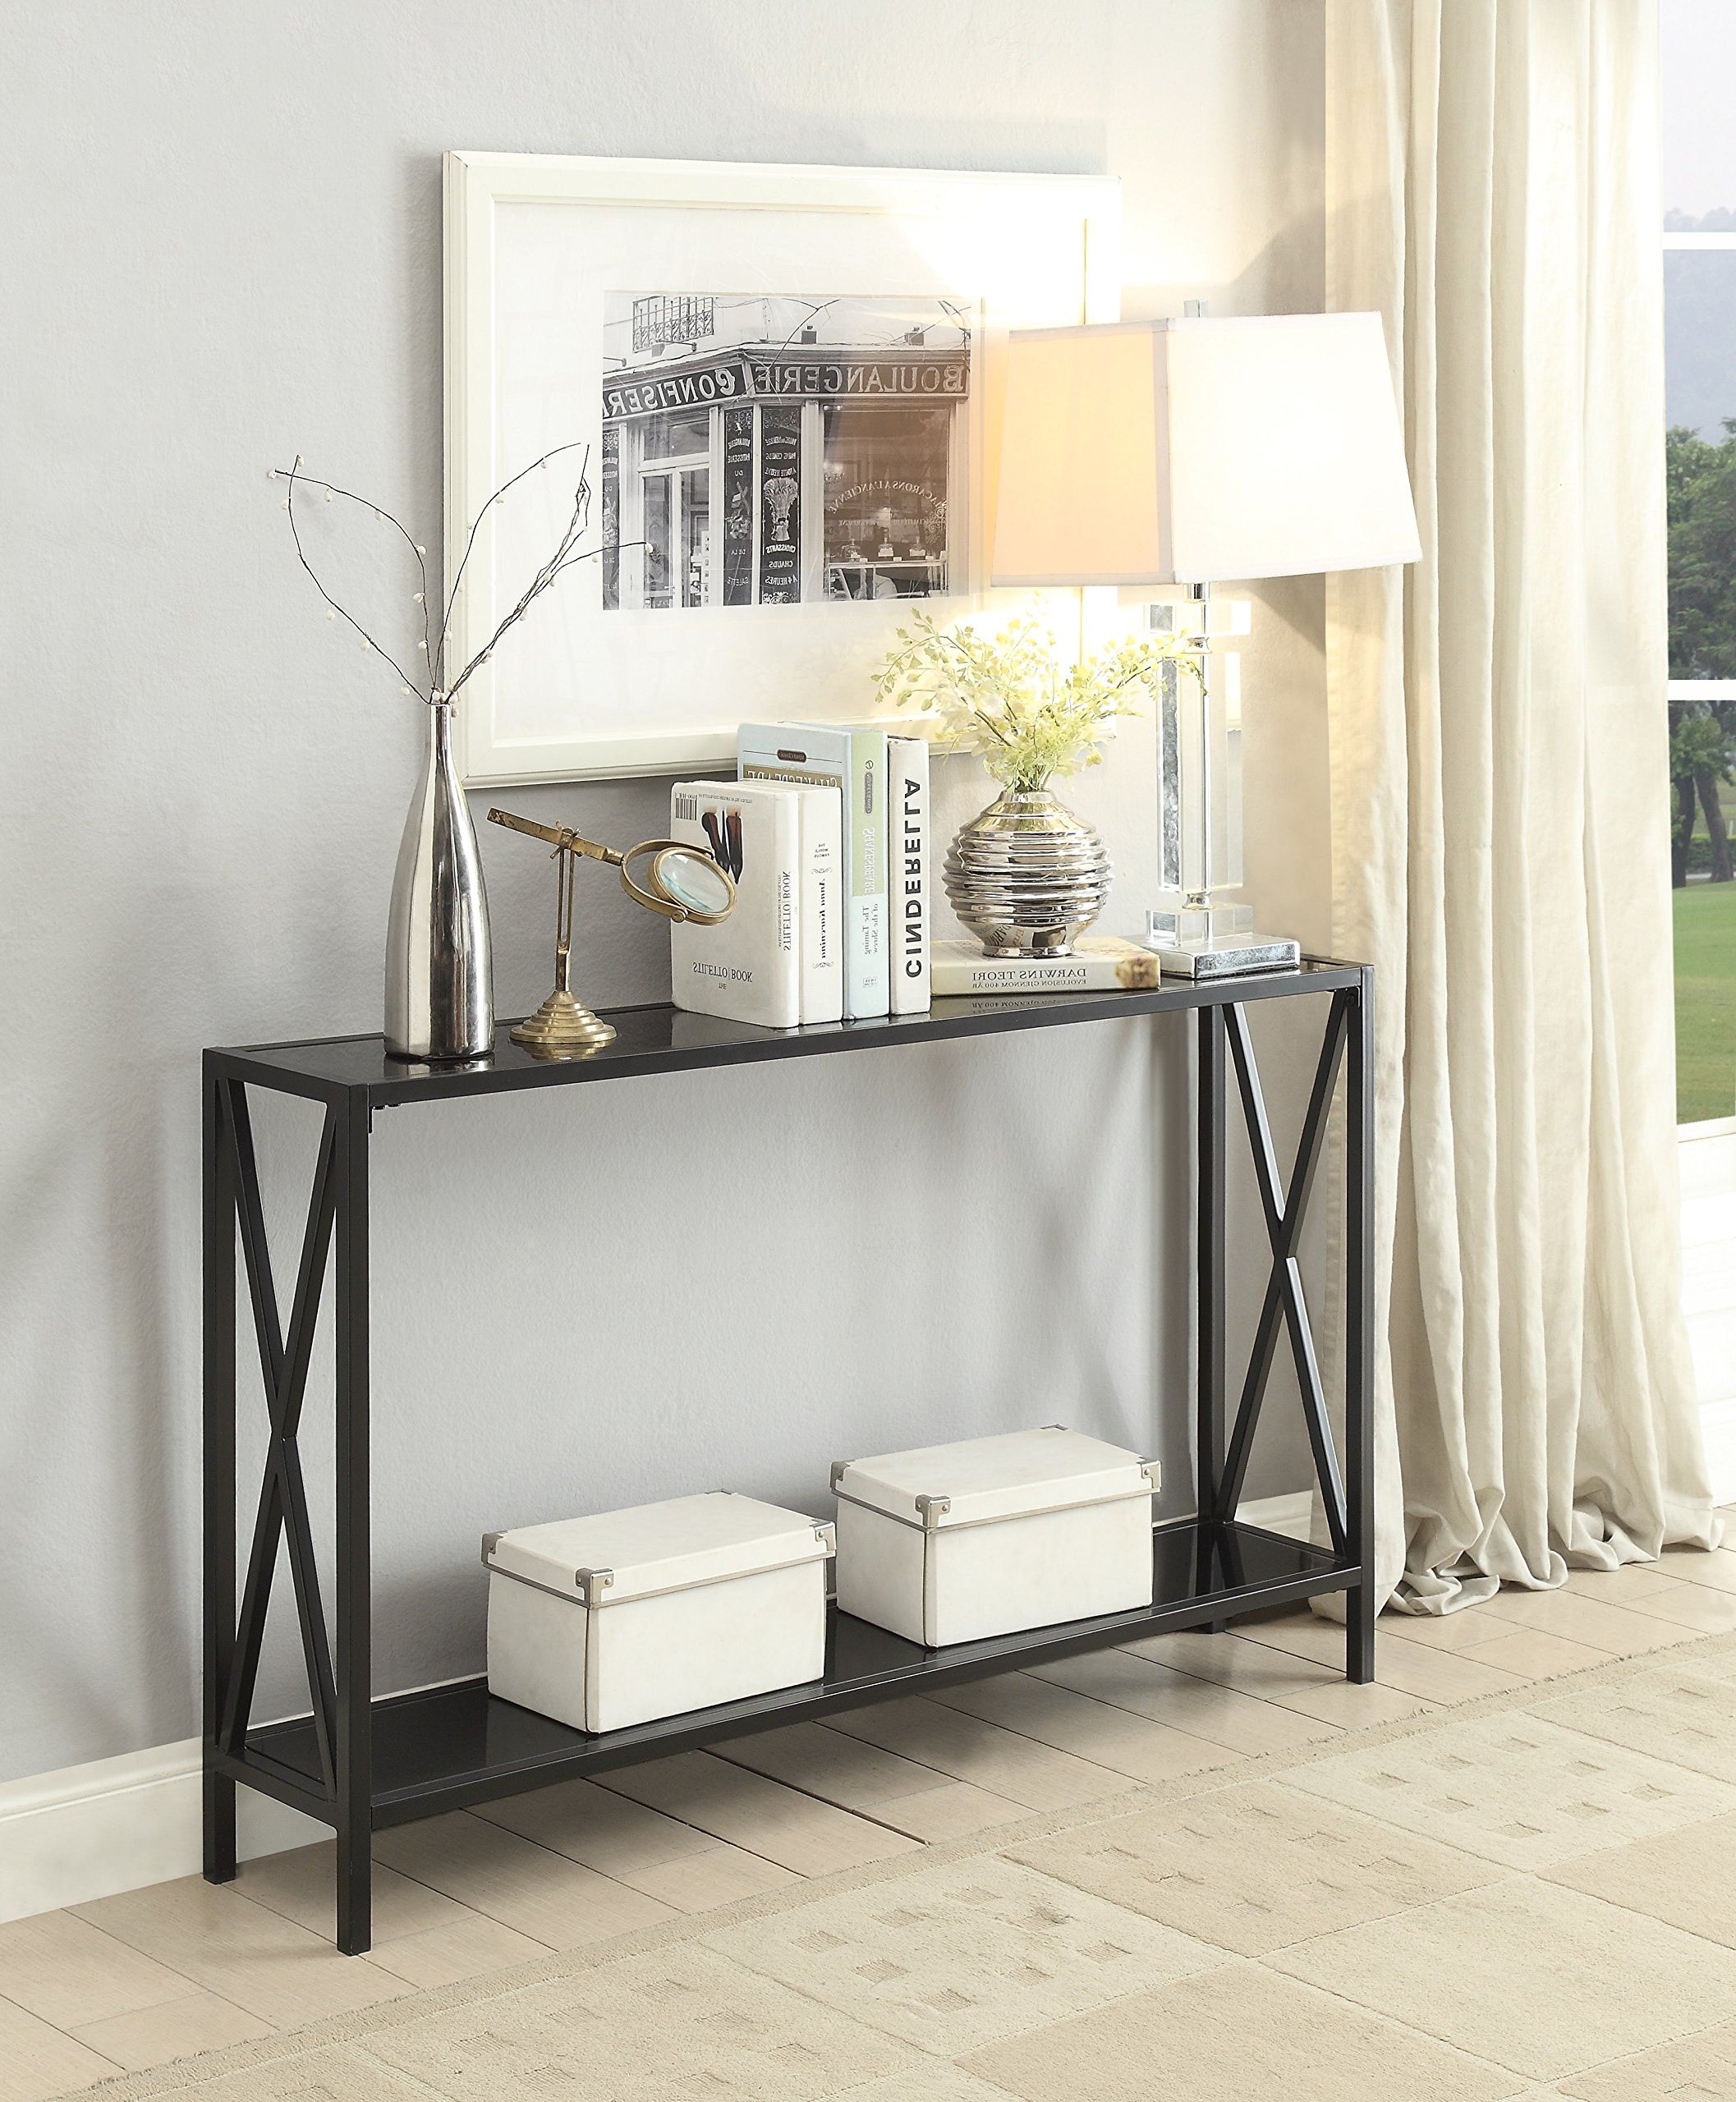 Fashionable Gray Wood Black Steel Console Tables For Cheap Black Entryway Tables, Find Black Entryway Tables (View 6 of 10)